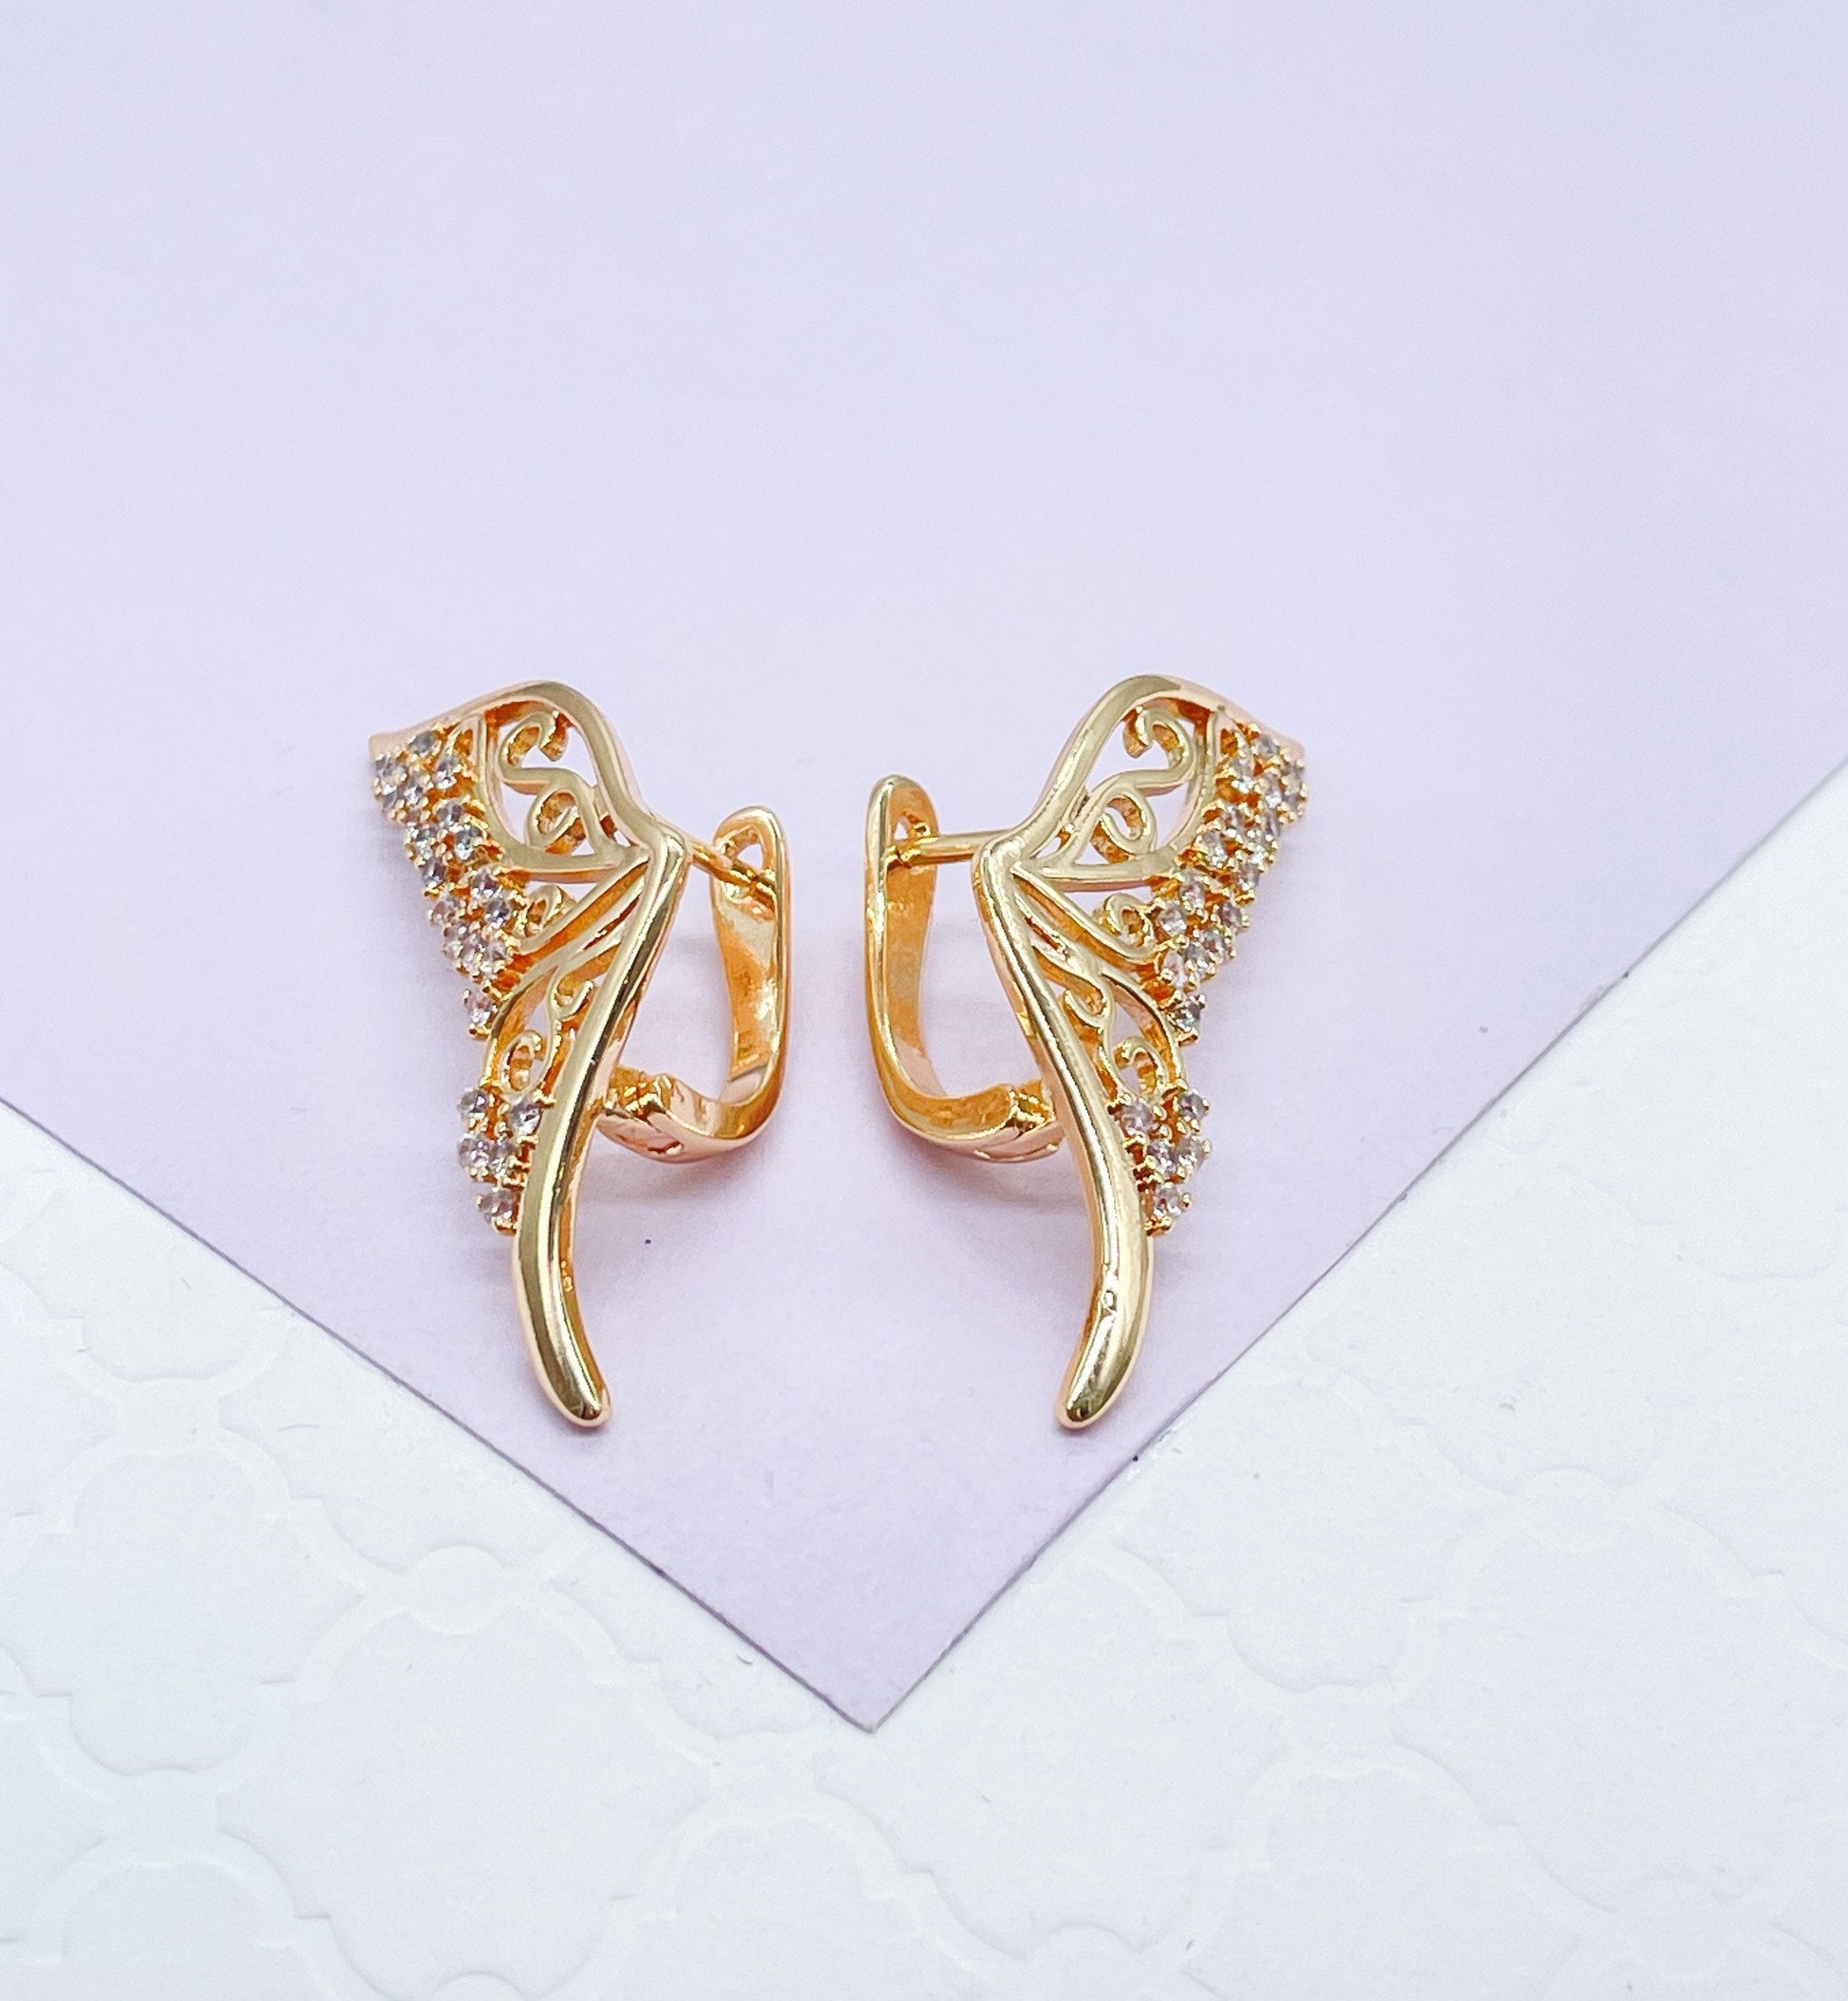 18k Gold Filled Butterfly Earring With Zirconia Stones